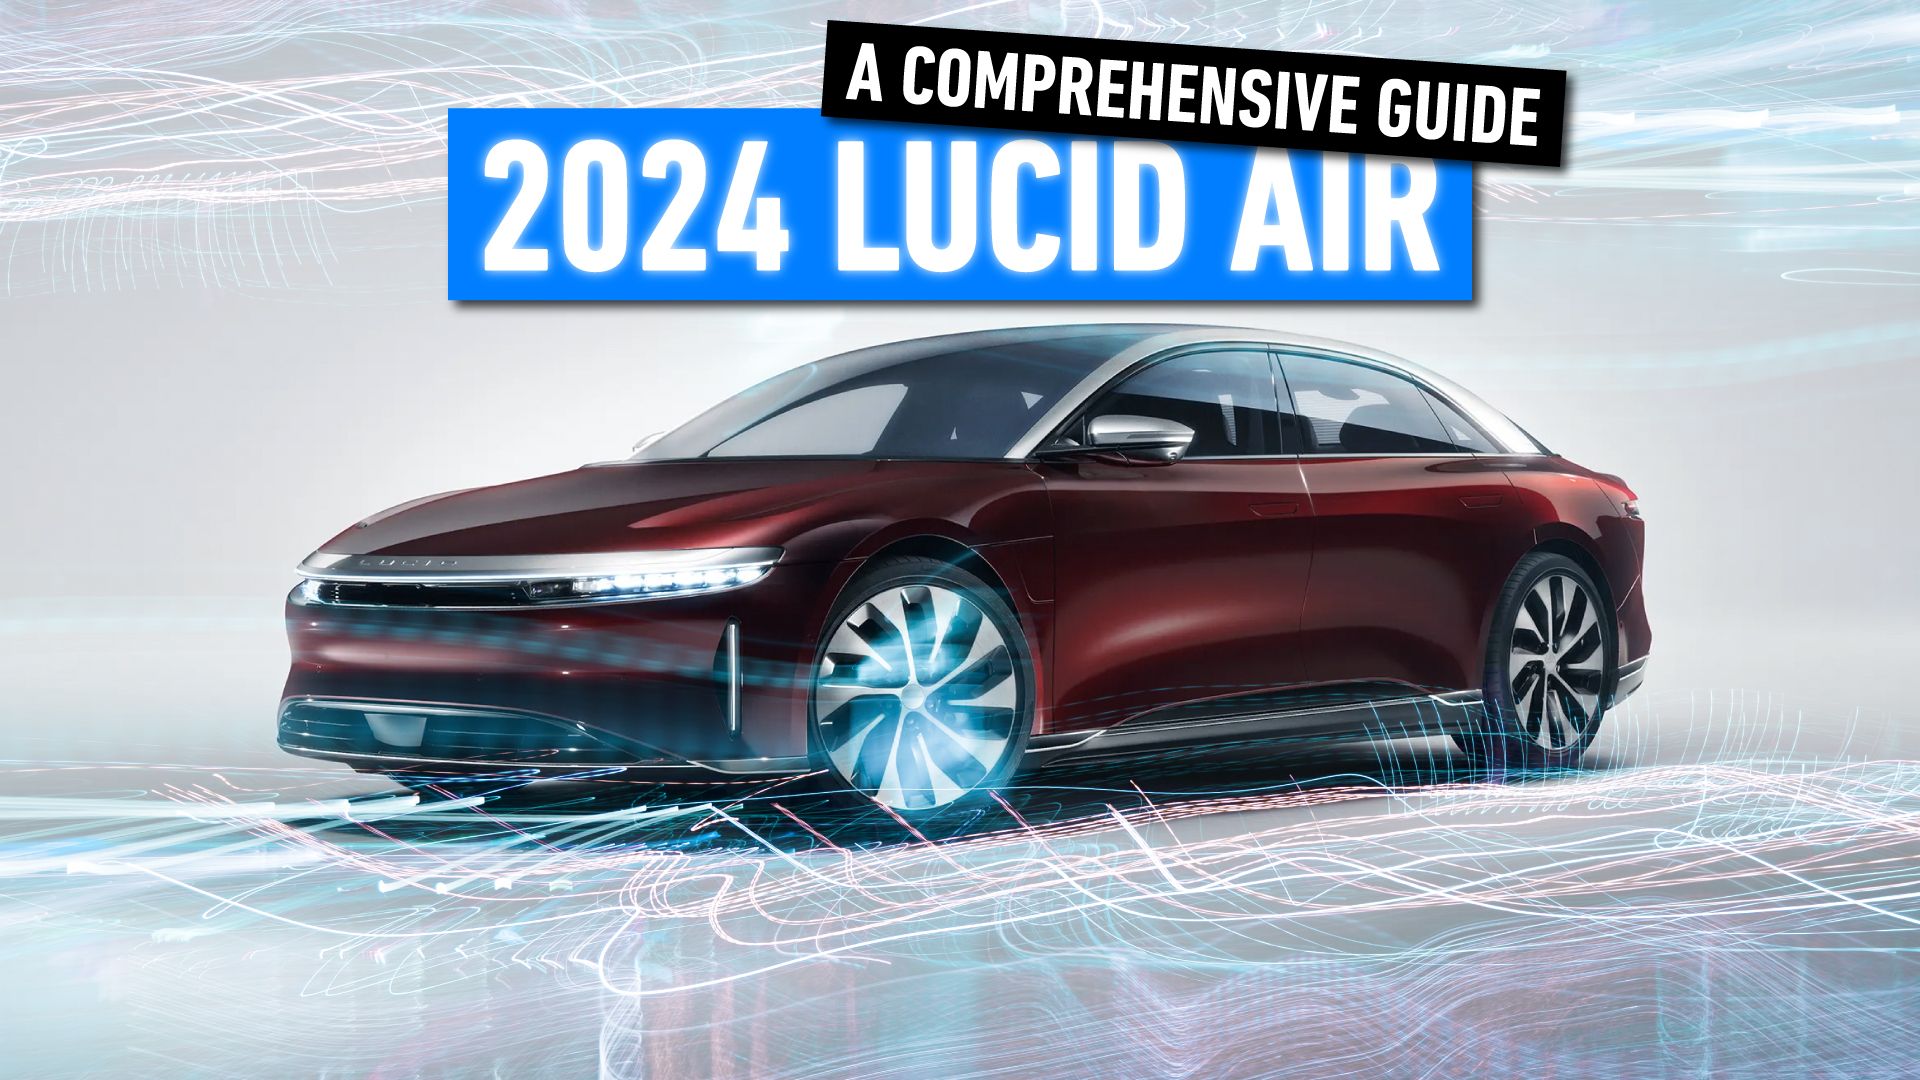 Red 2024 Lucid Air Comprehensive Guide custom image text overlay